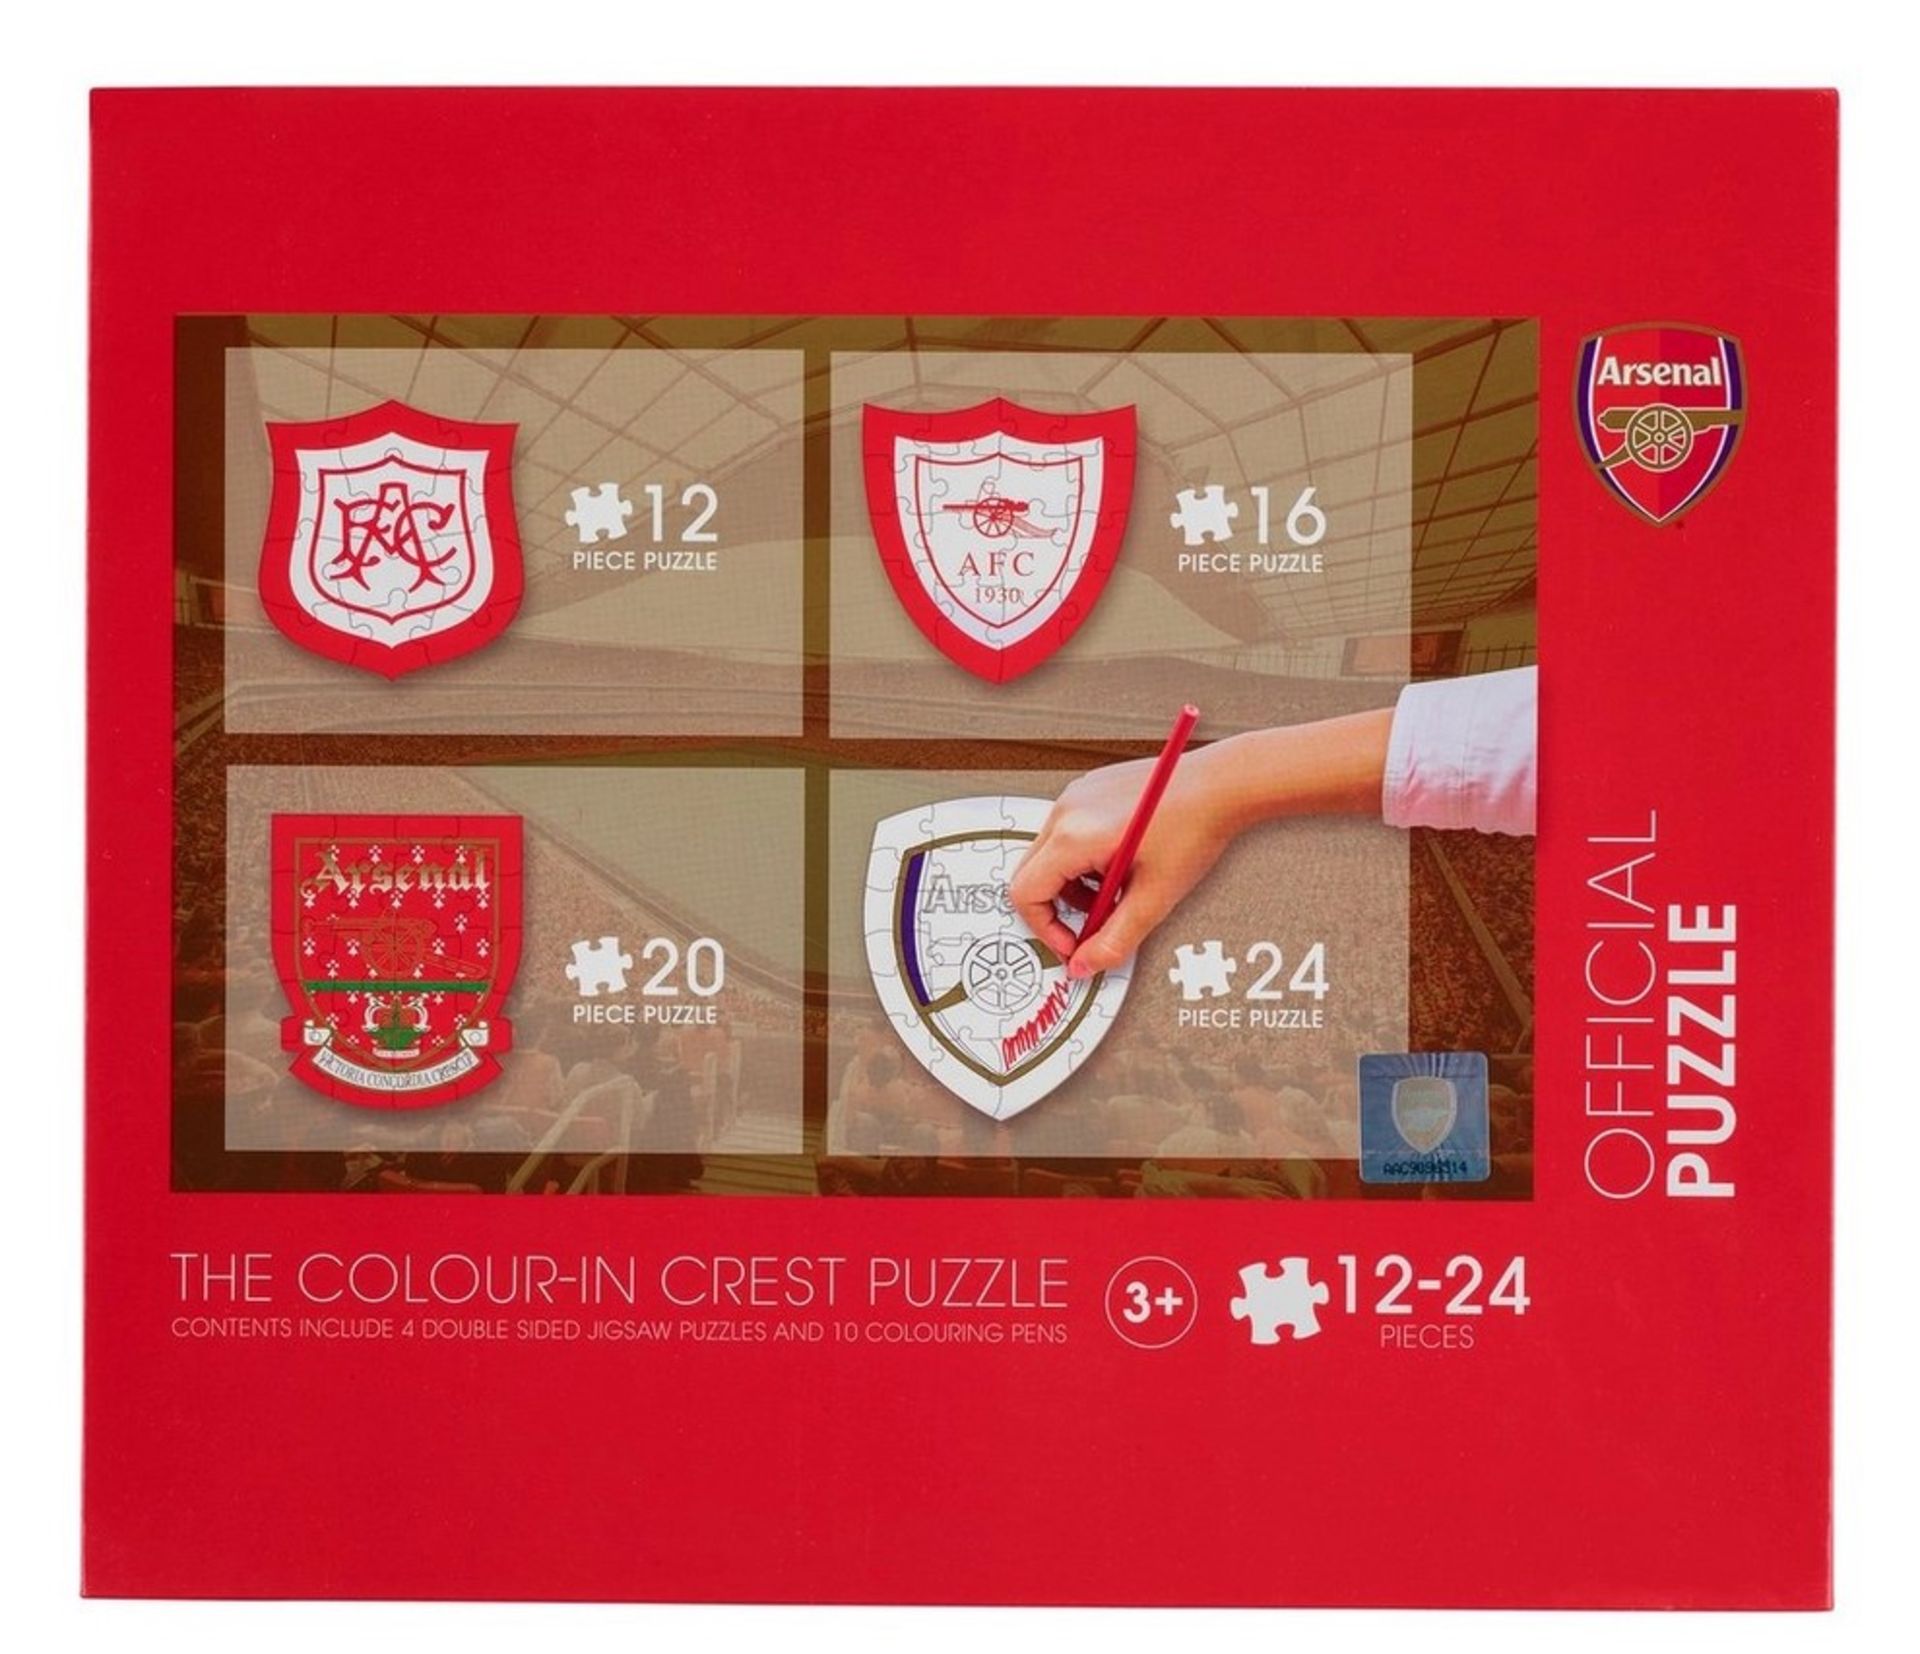 100 X BRAND NEW SEALED ARSENAL JIGSAW PUZZLE - OFFICIAL LICENSED MERCHANDISE - Image 2 of 4